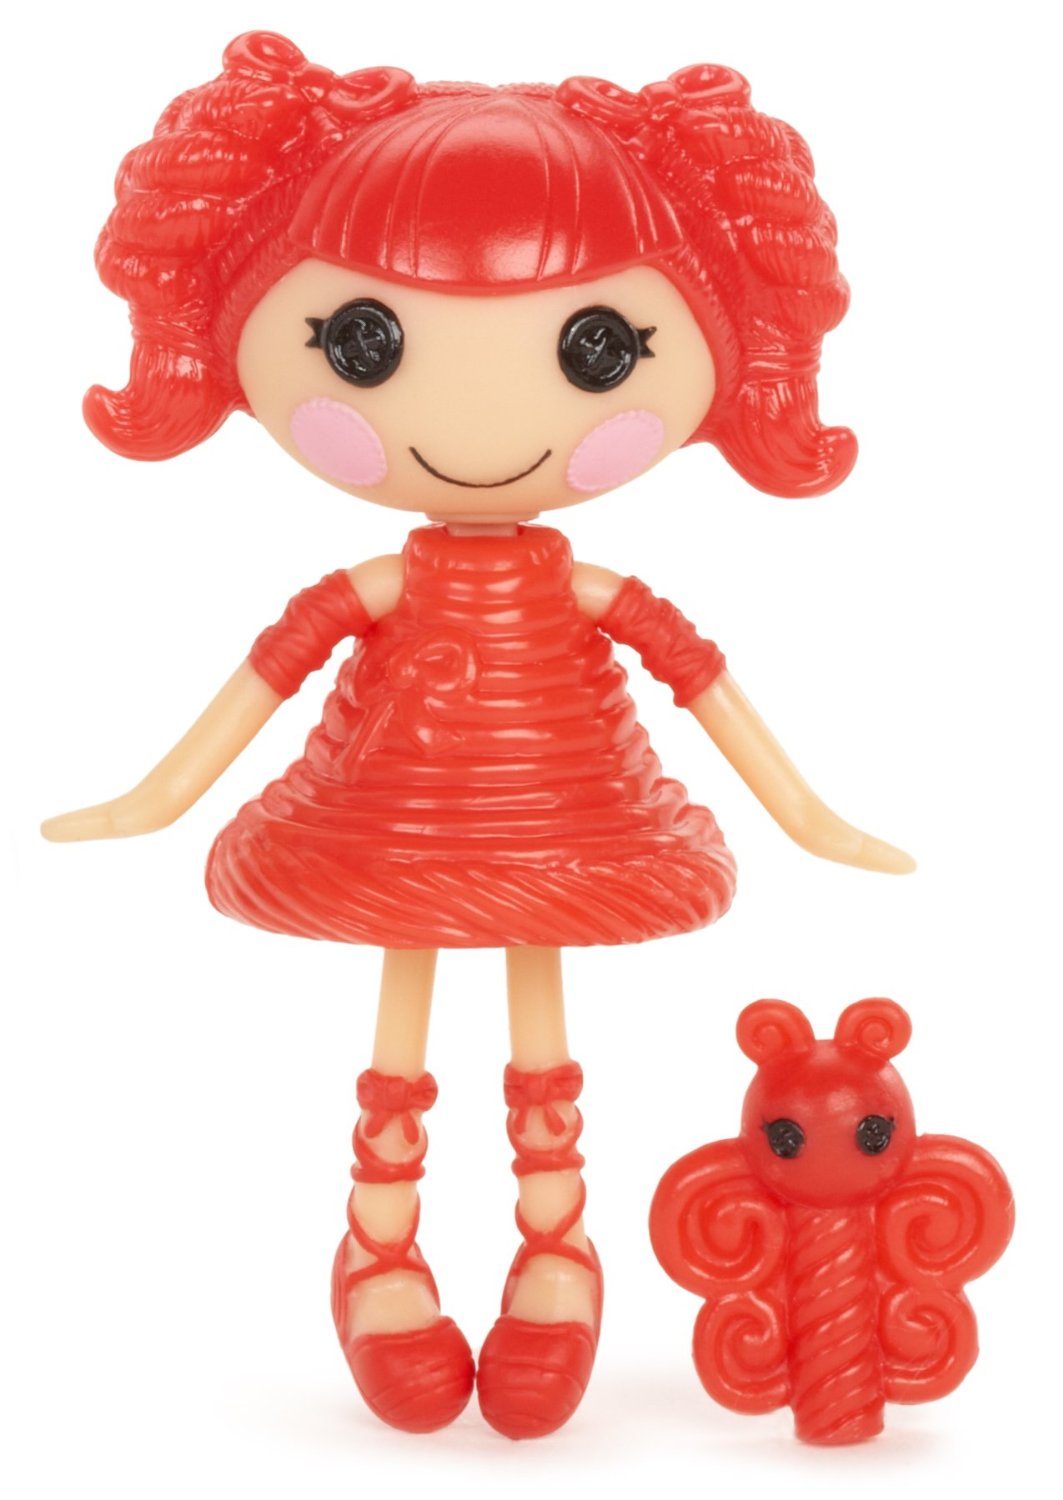 Category:Hair Color: Red | Lalaloopsy 